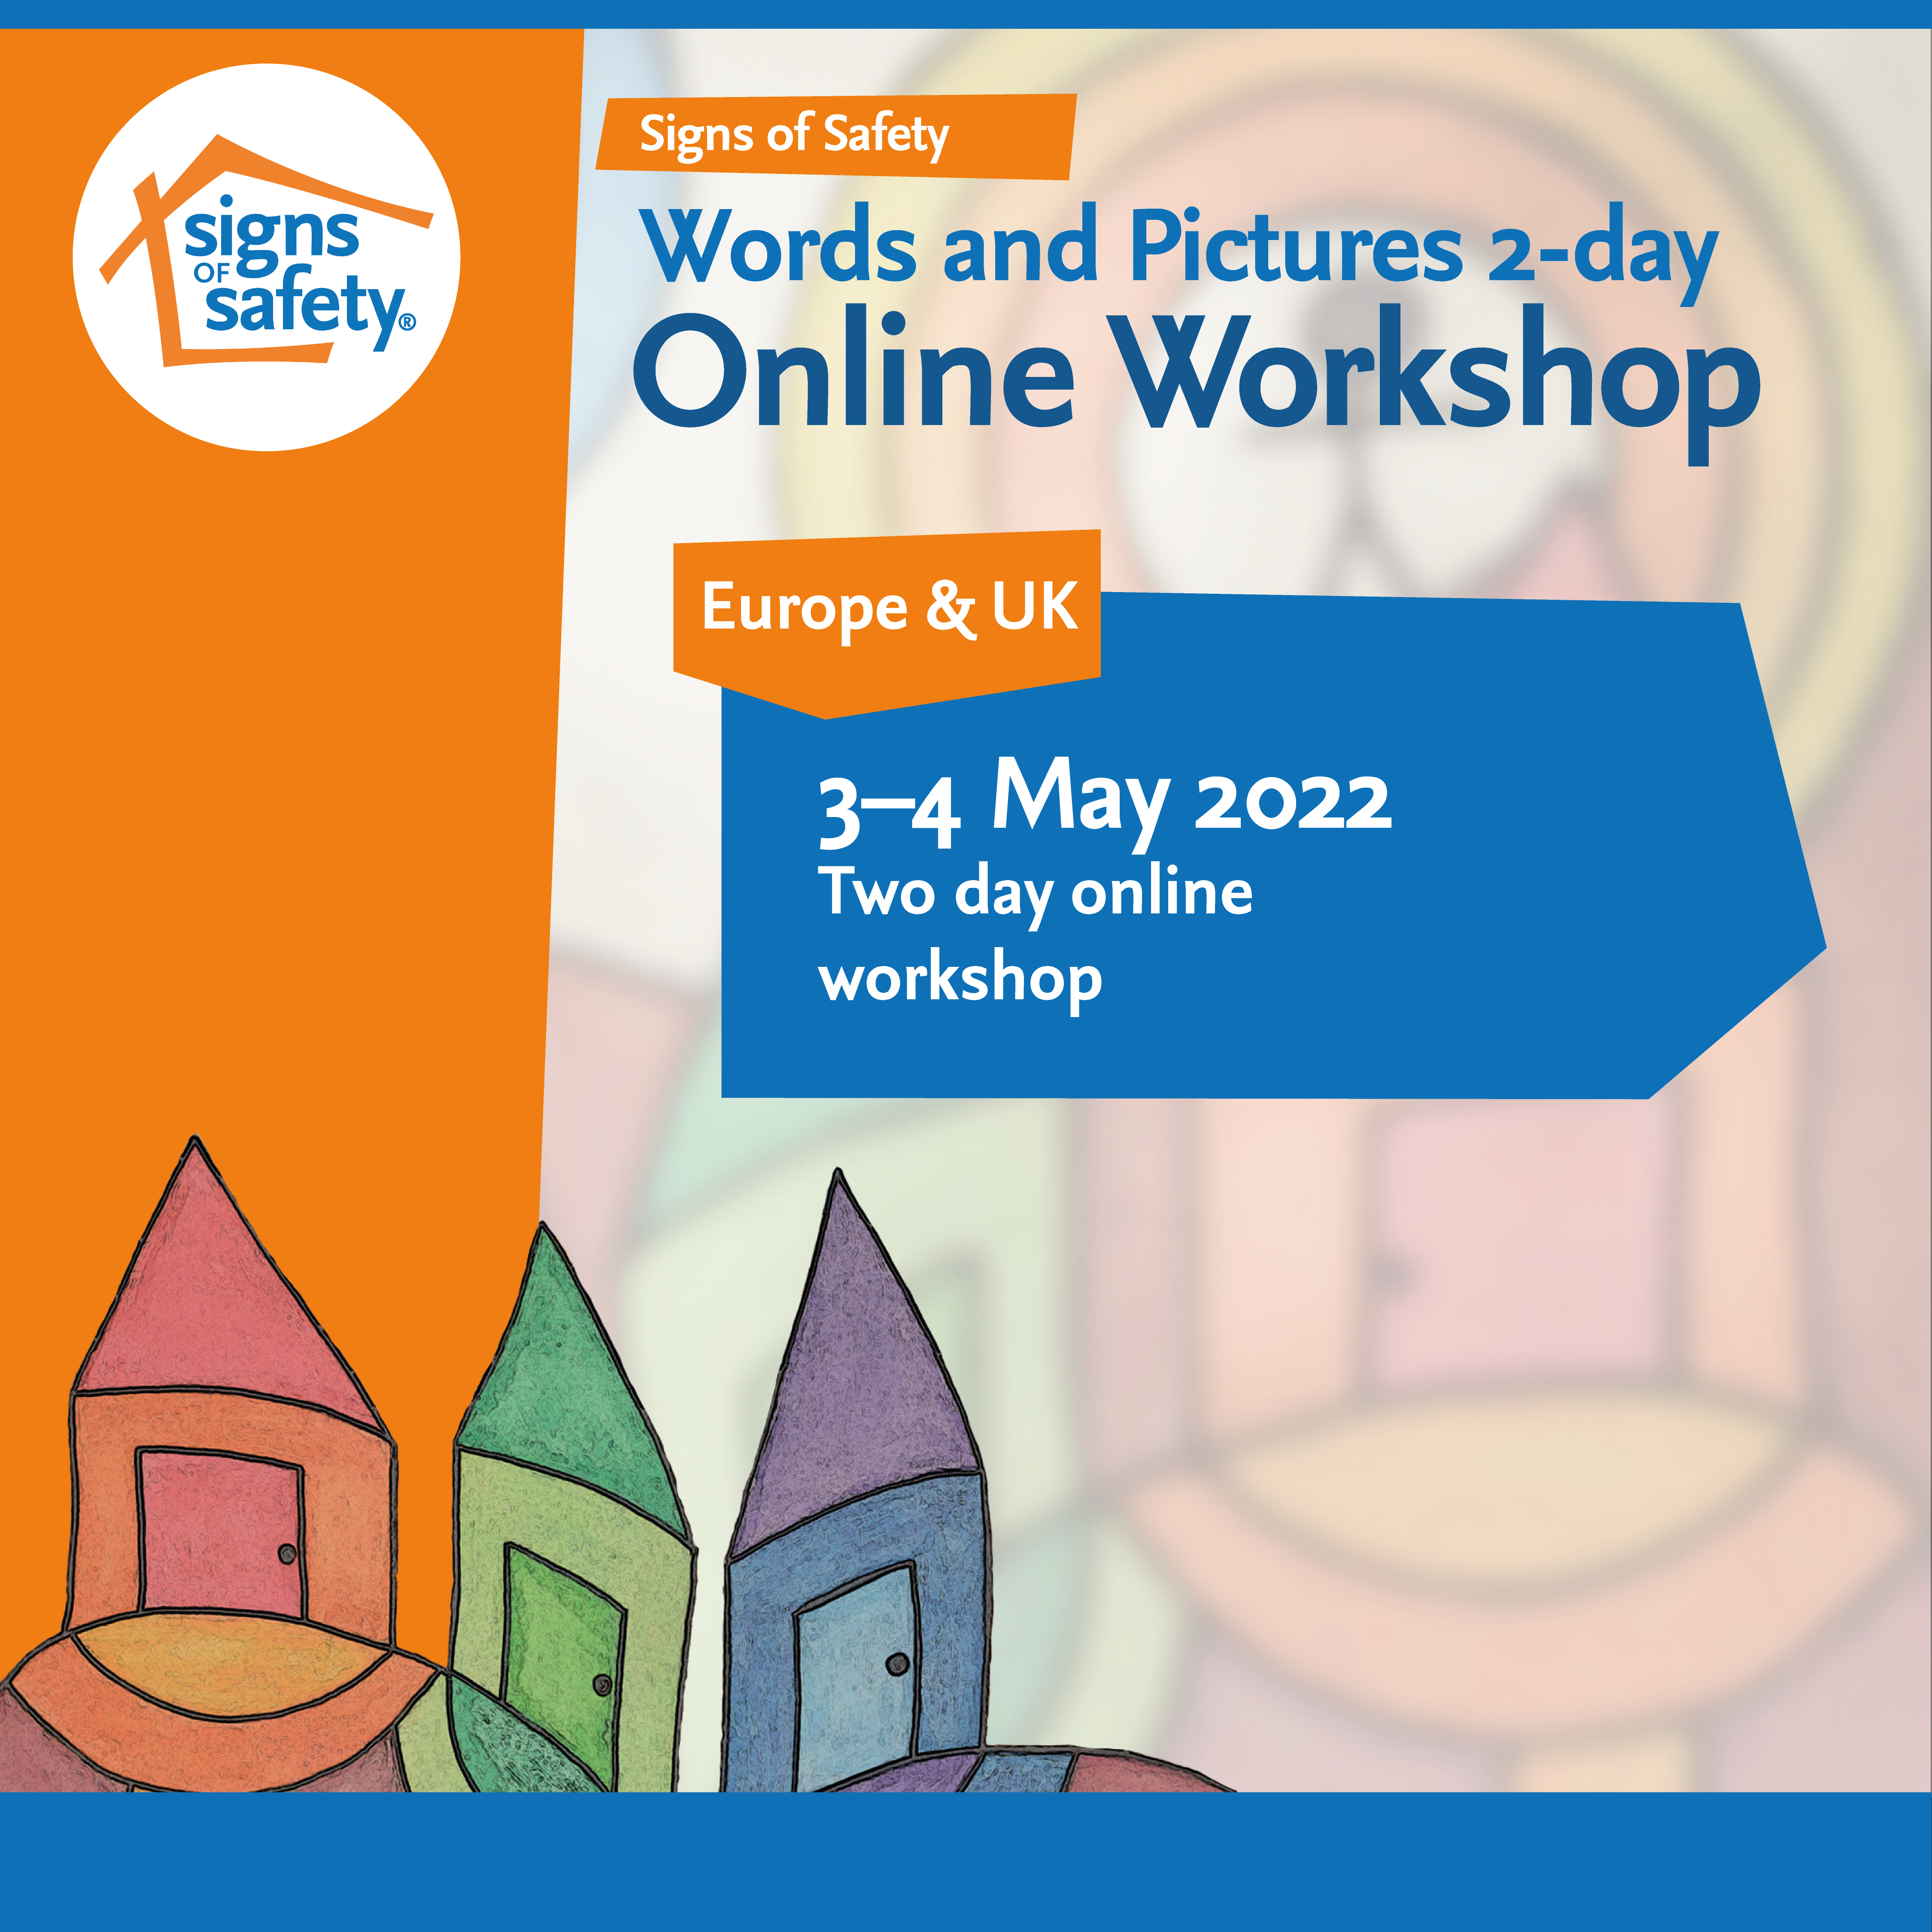 Words and Pictures Online Workshop